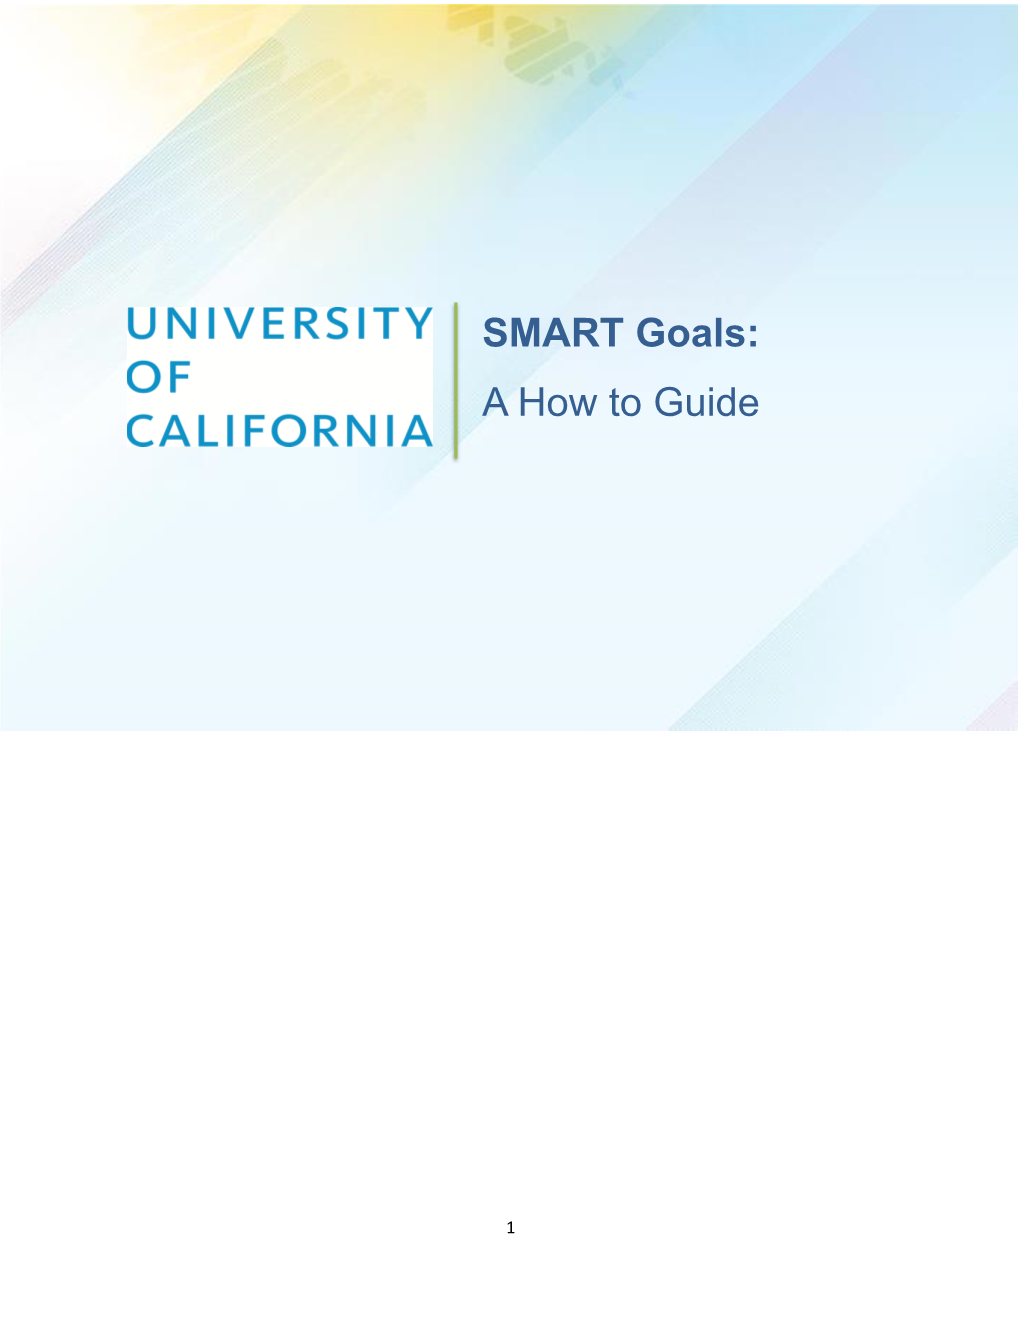 SMART Goals: a How to Guide